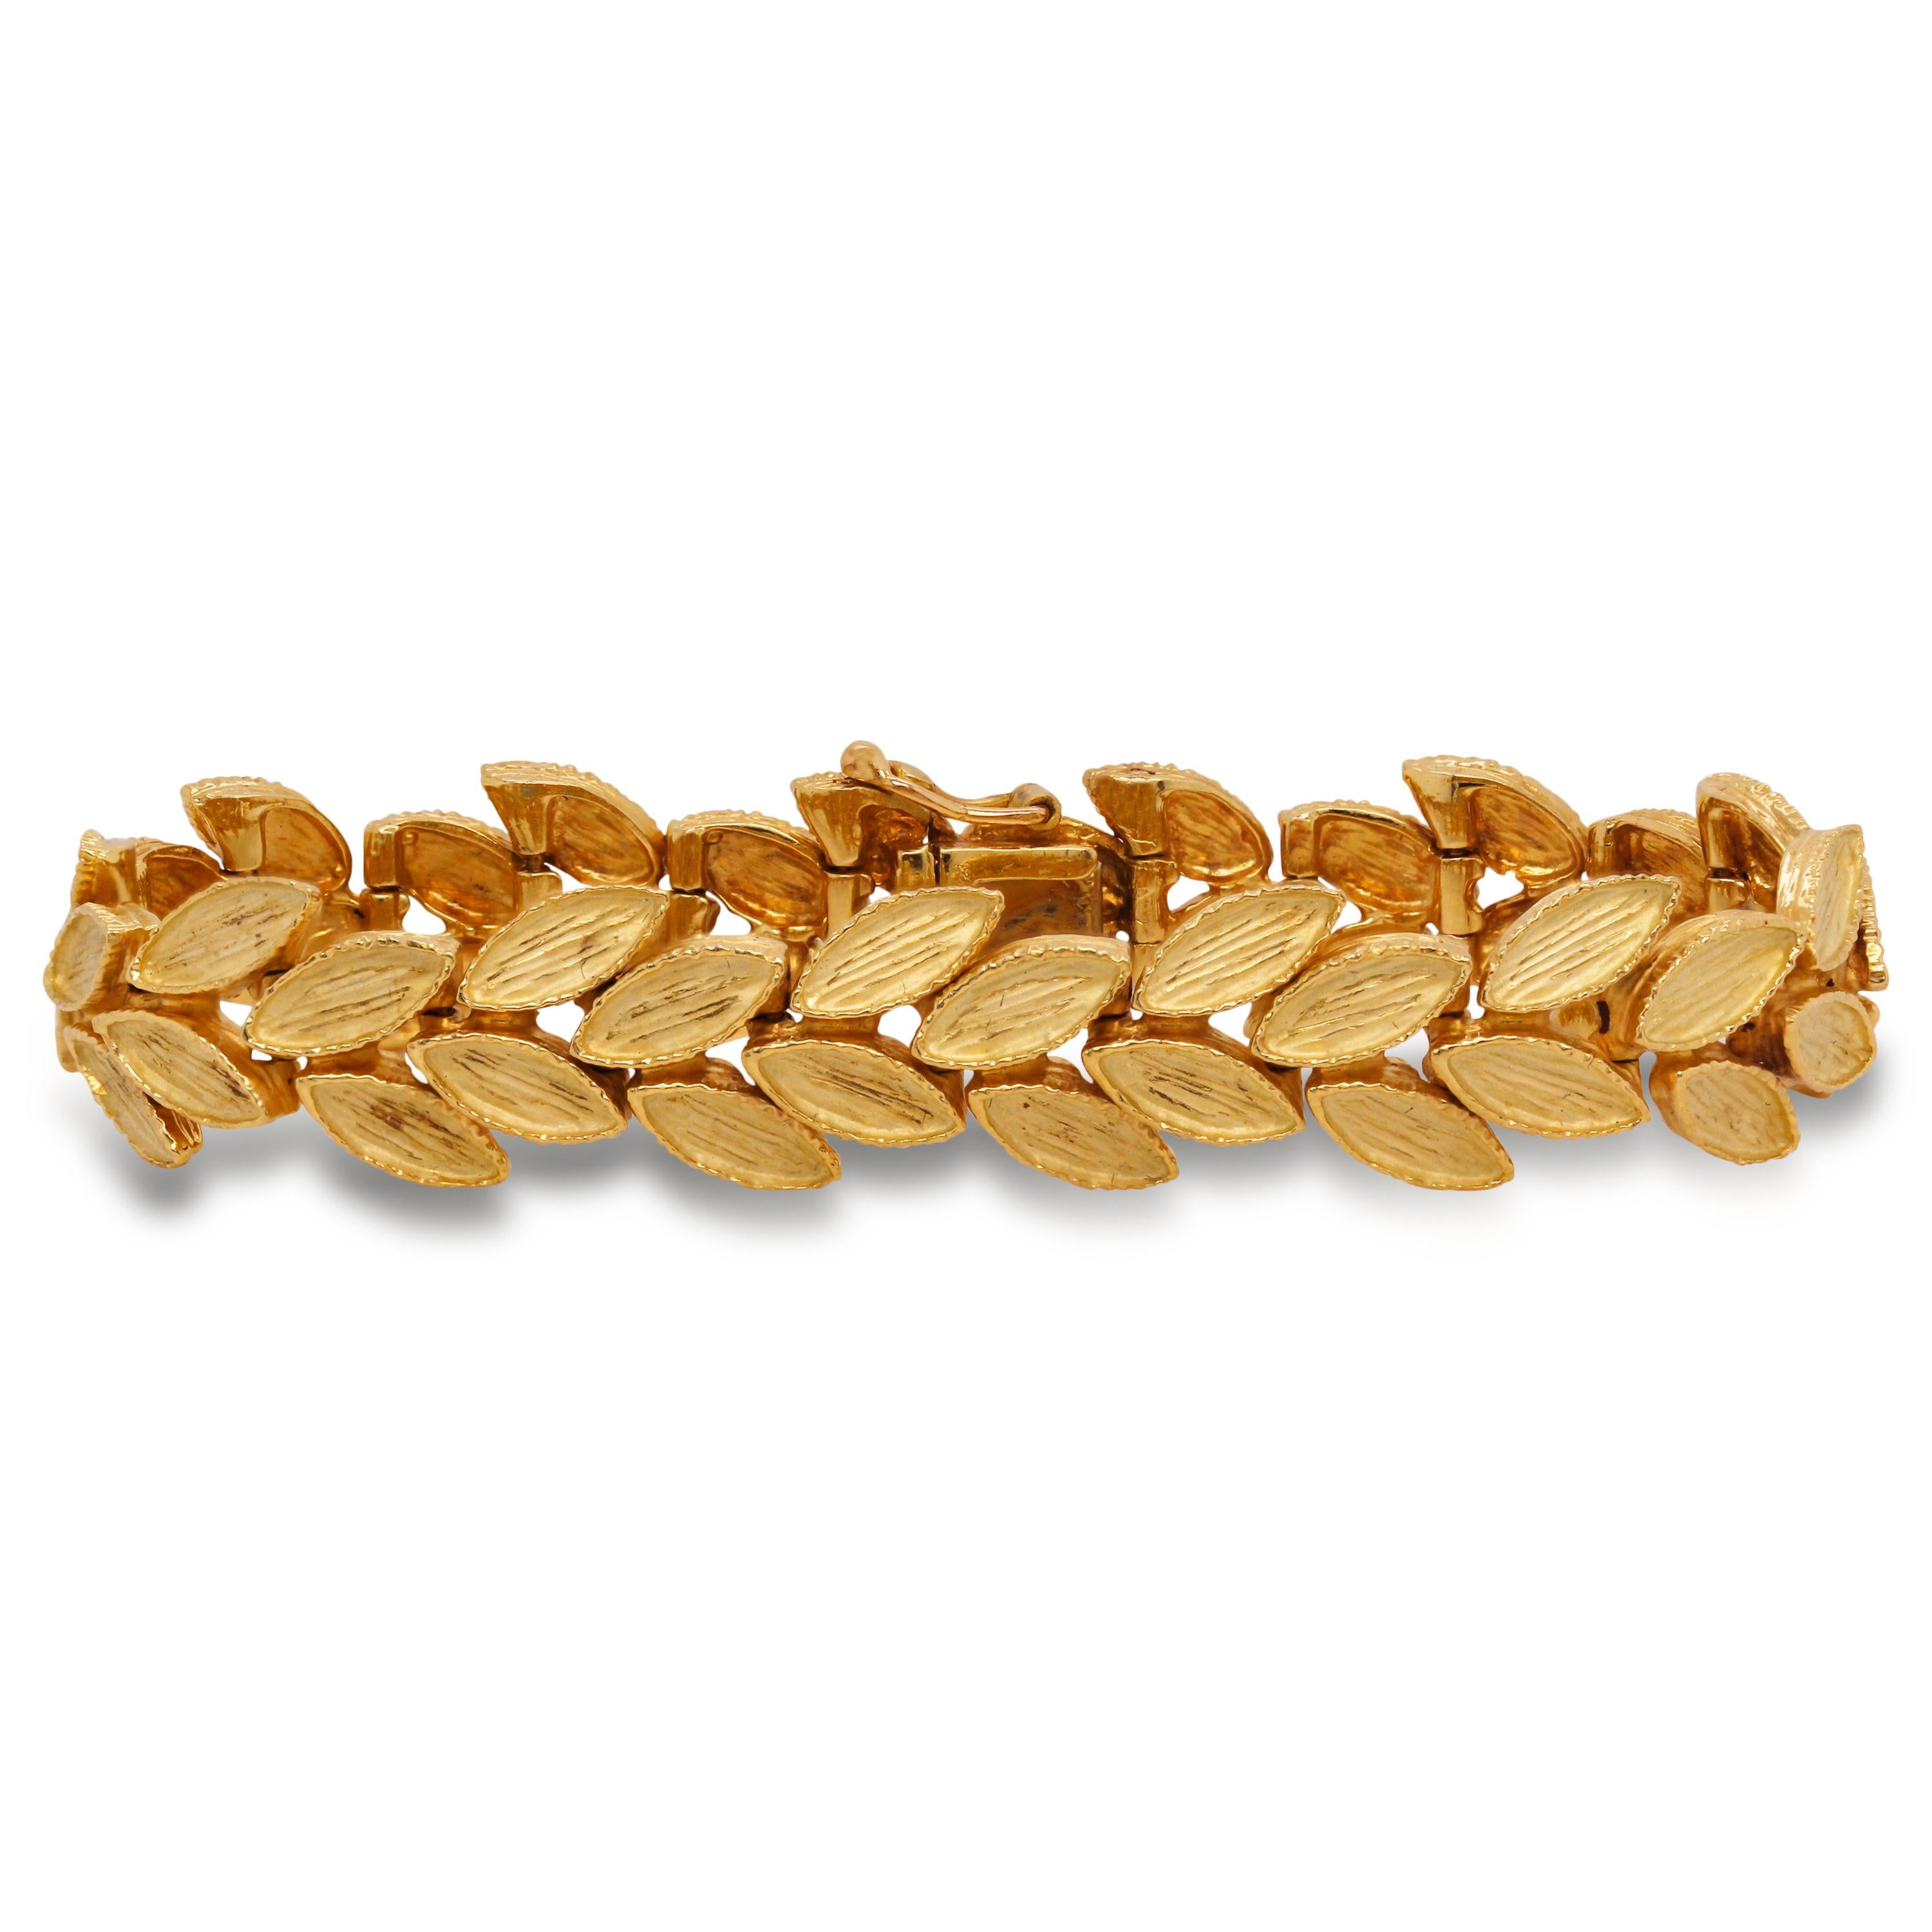 18 Karat Yellow Gold Floral Motif Leaves French Bracelet

The intricate attention to detail on this bracelet are remarkable and showcase the true beauty of hand made work. The leaves are all done in a brushed, matte-finished 18 karat yellow